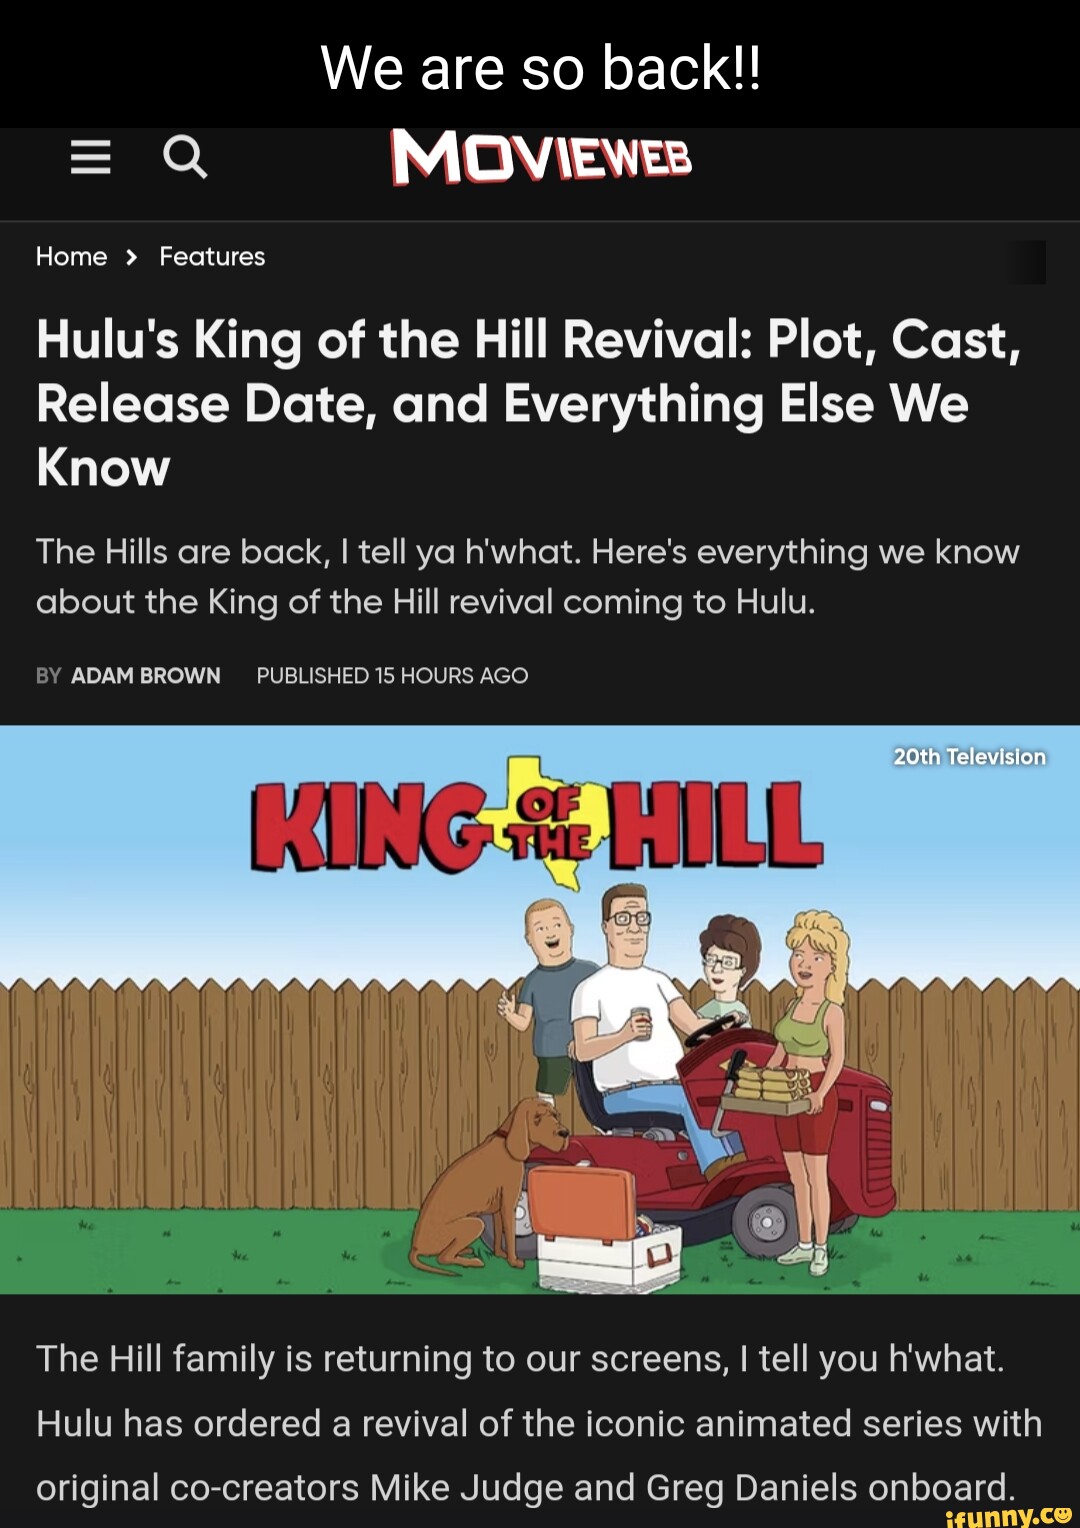 A revival of 'King of the Hill' is in the works again